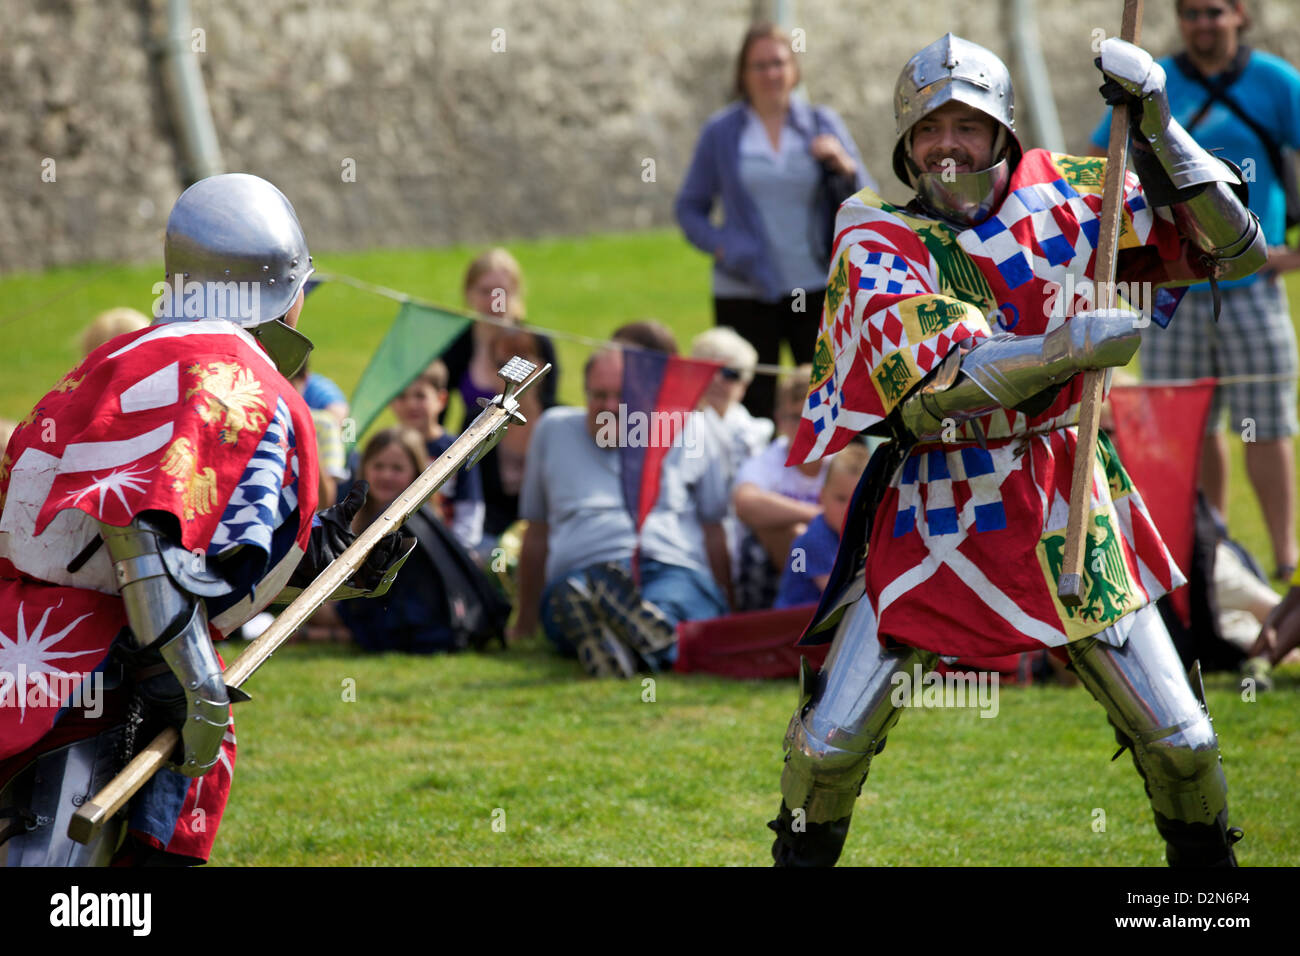 Reenactment of a knight's fight in the Tower of London, England, United Kingdom, Europe Stock Photo